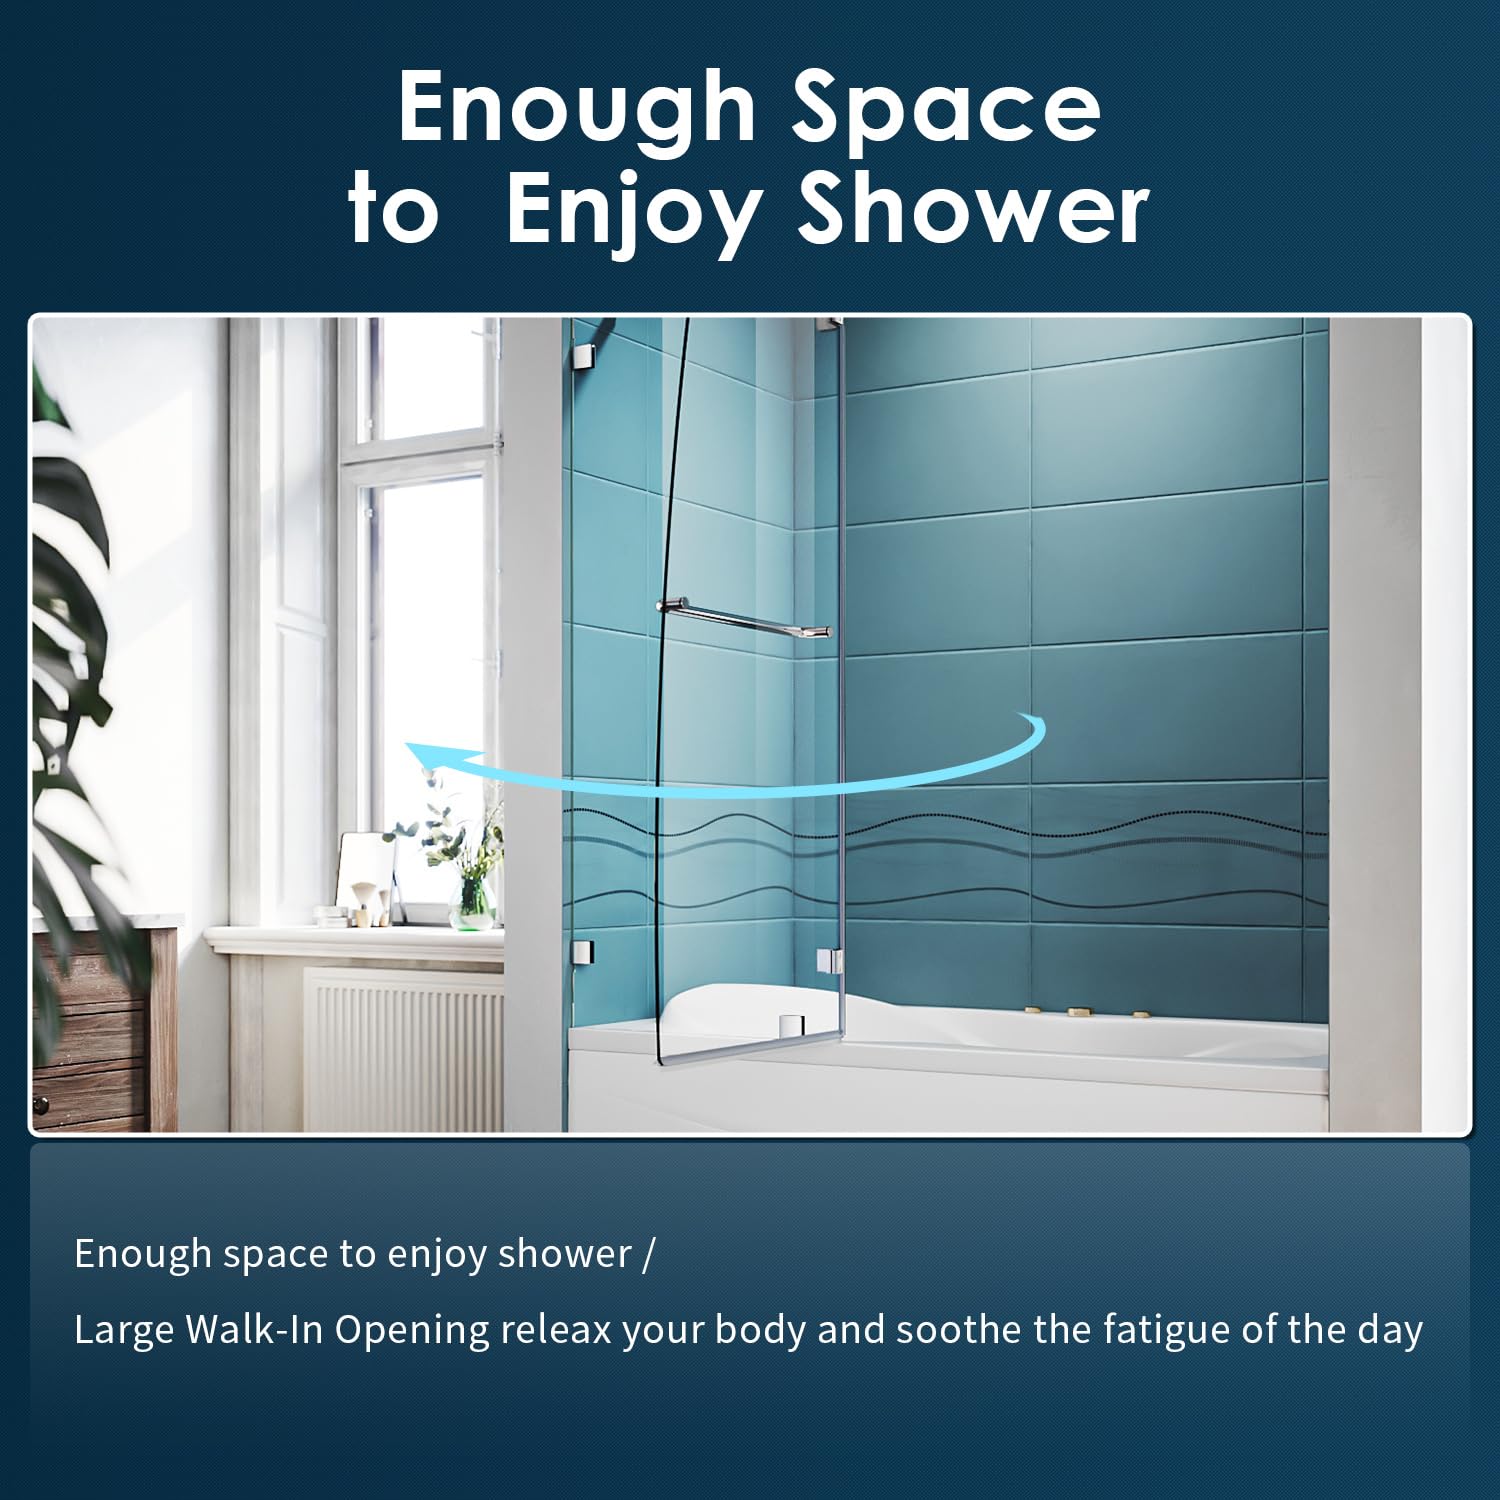 Enough space to enjoy shower. Large walk-in opening releax your body and soothe the fatigue of the day